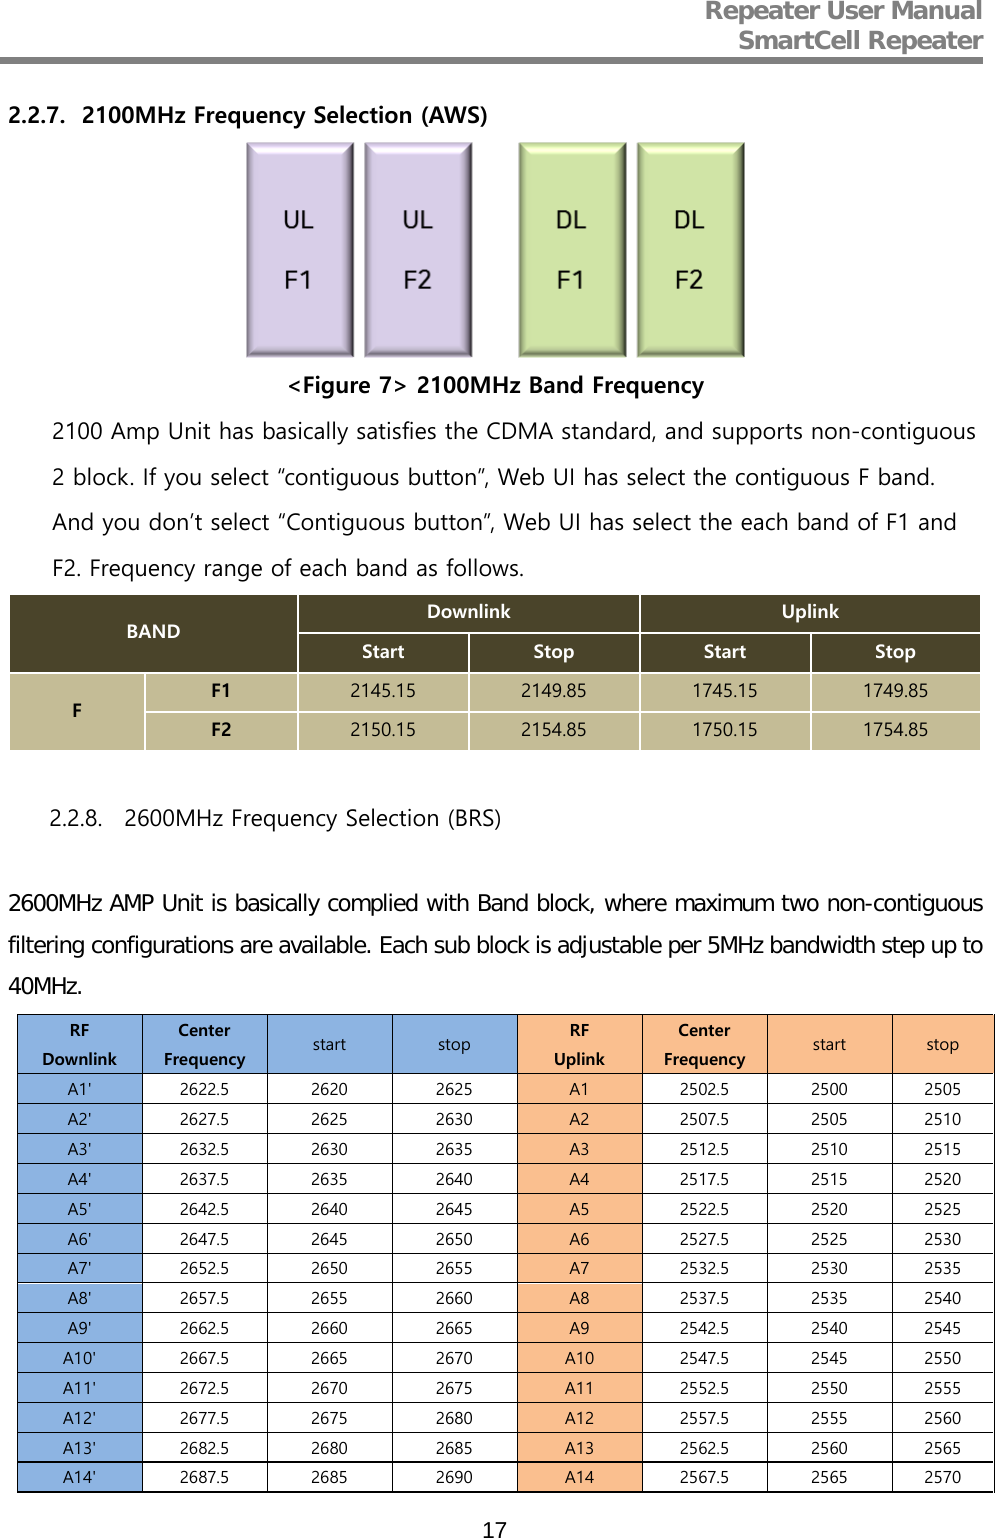 Repeater User Manual  SmartCell Repeater   17 2.2.7. 2100MHz Frequency Selection (AWS)  &lt;Figure 7&gt; 2100MHz Band Frequency 2100 Amp Unit has basically satisfies the CDMA standard, and supports non-contiguous 2 block. If you select “contiguous button”, Web UI has select the contiguous F band. And you don’t select “Contiguous button”, Web UI has select the each band of F1 and F2. Frequency range of each band as follows. BAND Downlink Uplink Start Stop Start Stop F F1 2145.15 2149.85 1745.15 1749.85 F2 2150.15 2154.85 1750.15 1754.85  2.2.8. 2600MHz Frequency Selection (BRS)  2600MHz AMP Unit is basically complied with Band block, where maximum two non-contiguous filtering configurations are available. Each sub block is adjustable per 5MHz bandwidth step up to 40MHz.  RF Downlink Center Frequency start stop RF Uplink Center Frequency start stop A1&apos; 2622.5 2620  2625  A1 2502.5 2500  2505  A2&apos; 2627.5 2625  2630  A2 2507.5 2505  2510  A3&apos; 2632.5 2630  2635  A3 2512.5 2510  2515  A4&apos; 2637.5 2635  2640  A4 2517.5 2515  2520  A5&apos; 2642.5 2640  2645  A5 2522.5 2520  2525  A6&apos; 2647.5 2645  2650  A6 2527.5 2525  2530  A7&apos; 2652.5 2650  2655  A7 2532.5 2530  2535  A8&apos; 2657.5 2655  2660  A8 2537.5 2535  2540  A9&apos; 2662.5 2660  2665  A9 2542.5 2540  2545  A10&apos; 2667.5 2665  2670  A10 2547.5 2545  2550  A11&apos; 2672.5 2670  2675  A11 2552.5 2550  2555  A12&apos; 2677.5 2675  2680  A12 2557.5 2555  2560  A13&apos; 2682.5 2680  2685  A13 2562.5 2560  2565  A14&apos; 2687.5 2685  2690  A14 2567.5 2565  2570  